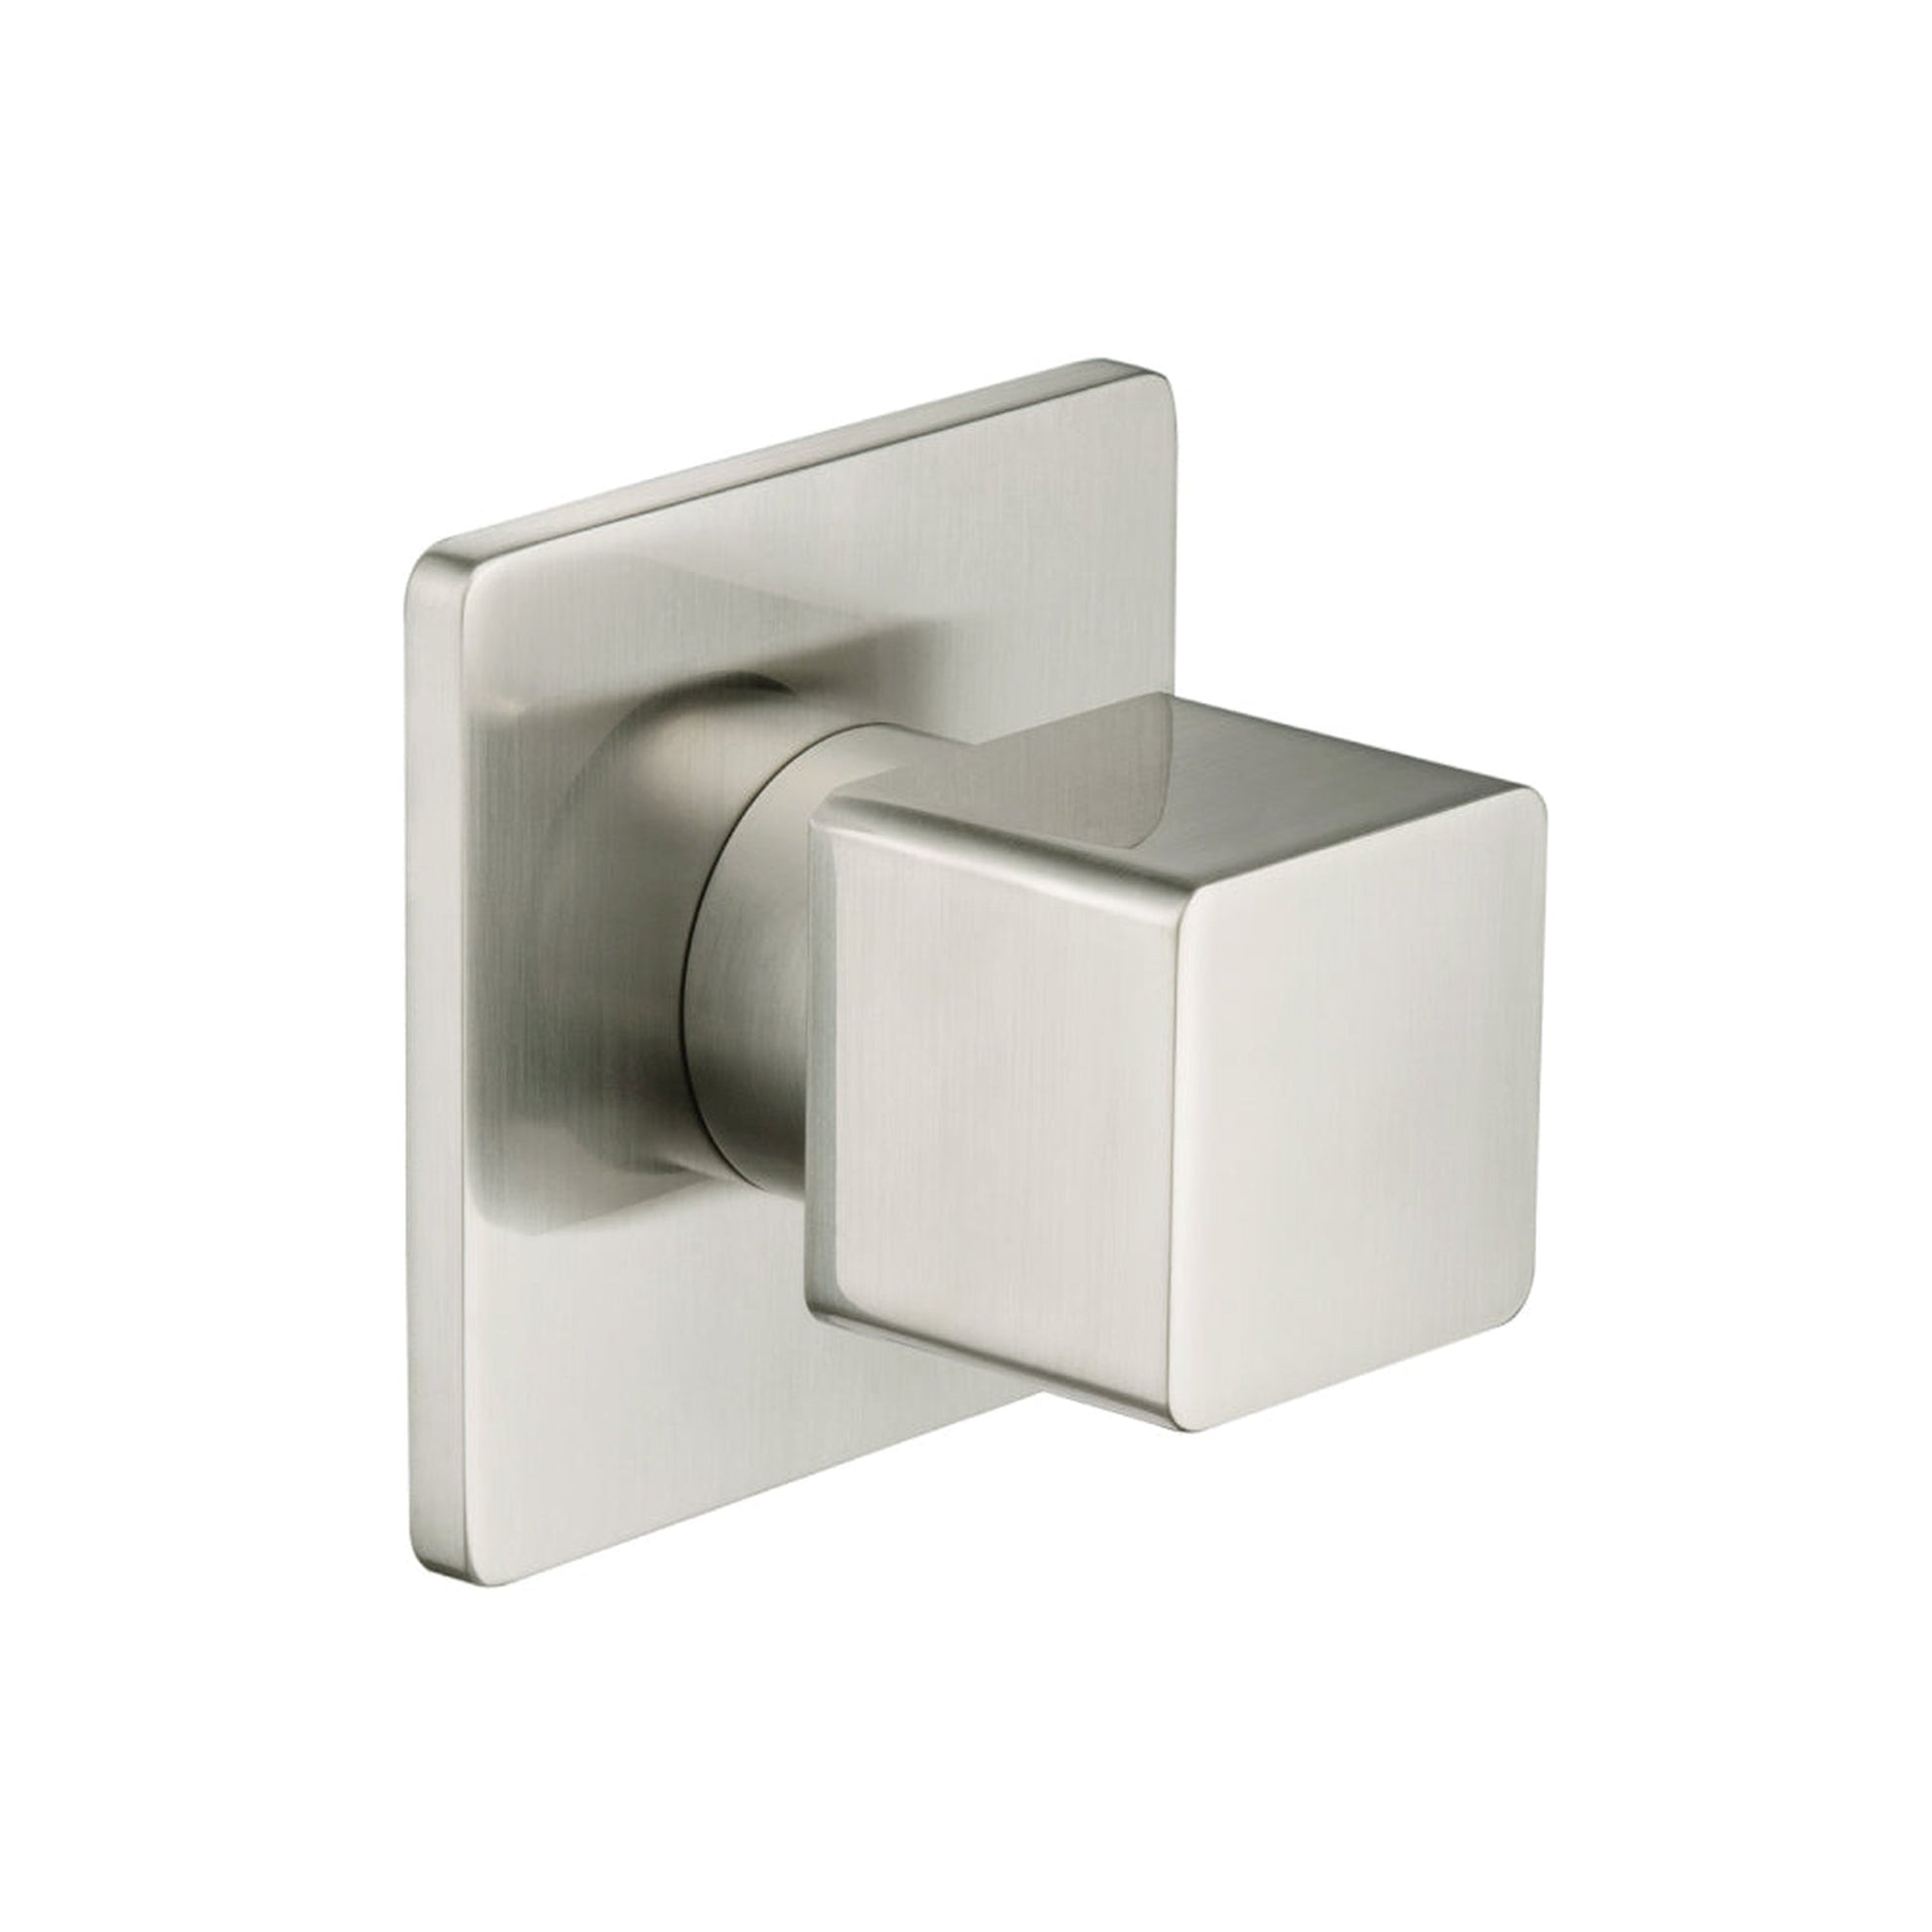 Isenberg Serie 196 3" Brushed Nickel PVD Wall Mounted Shower Faucet Trim With 0.75" Single-Output NPT Female Connection Volume Control Valve